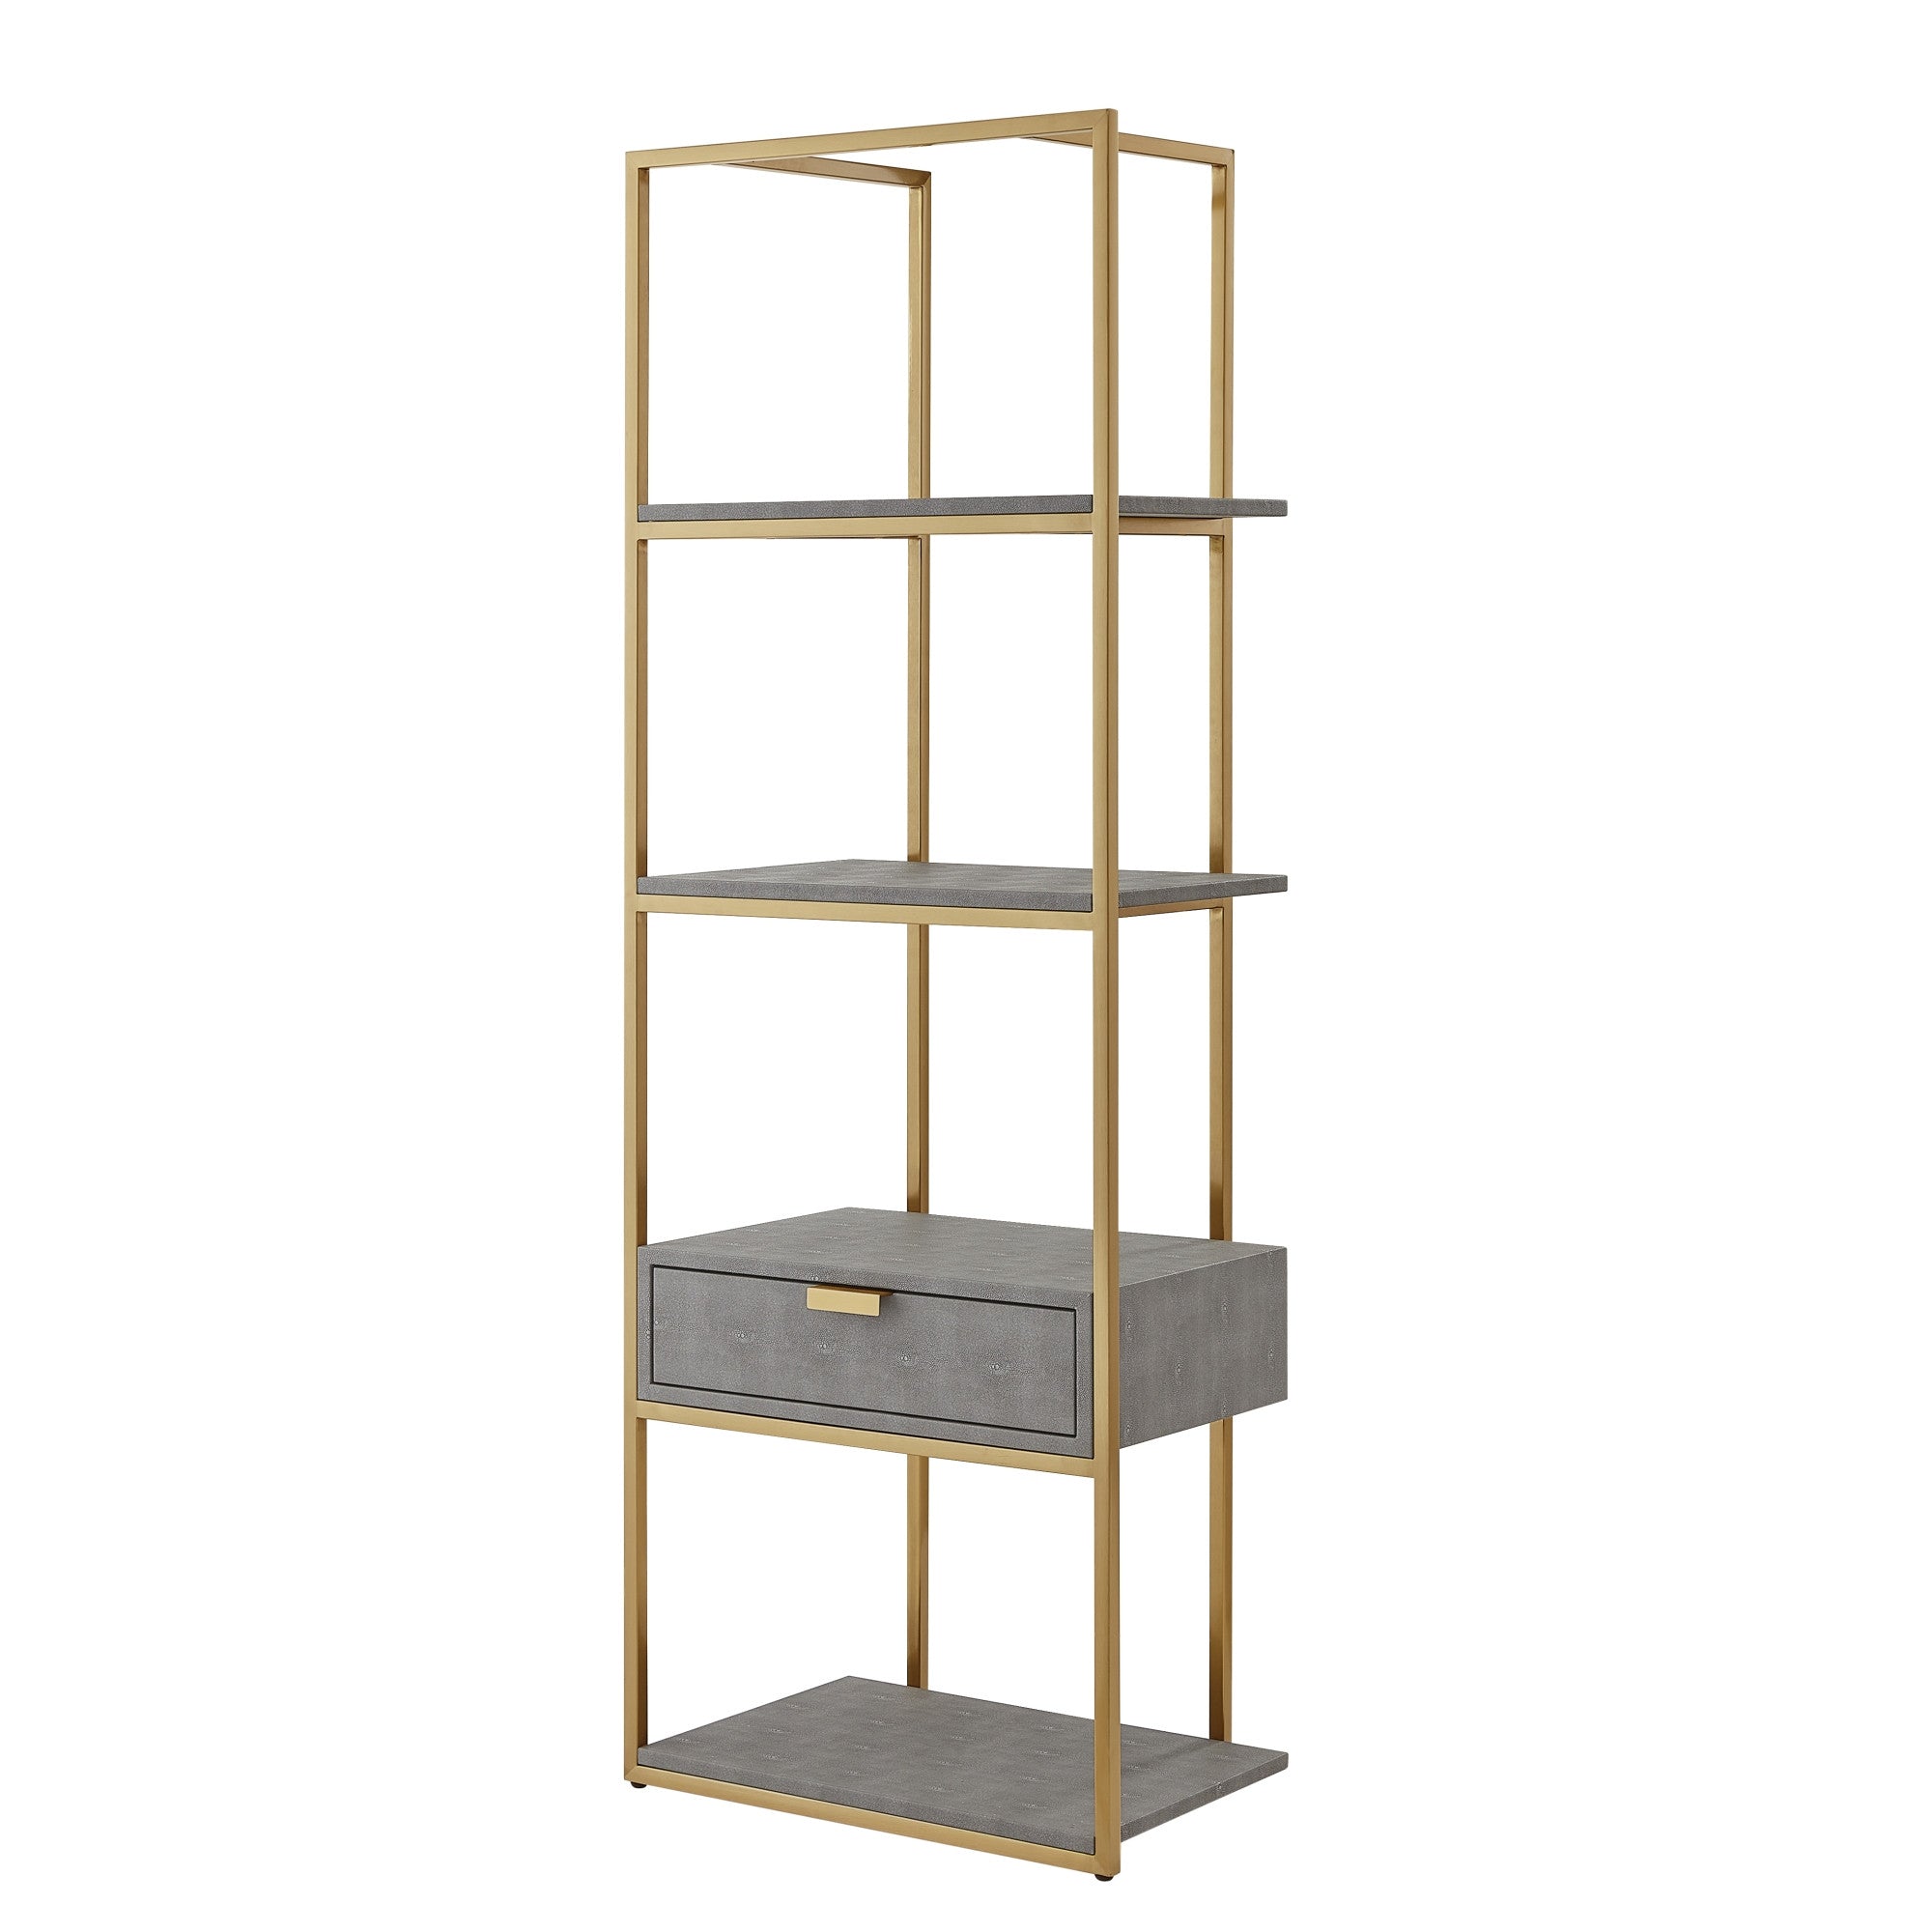 68" Cream Stainless Steel Four Tier Etagere Bookcase with a drawer